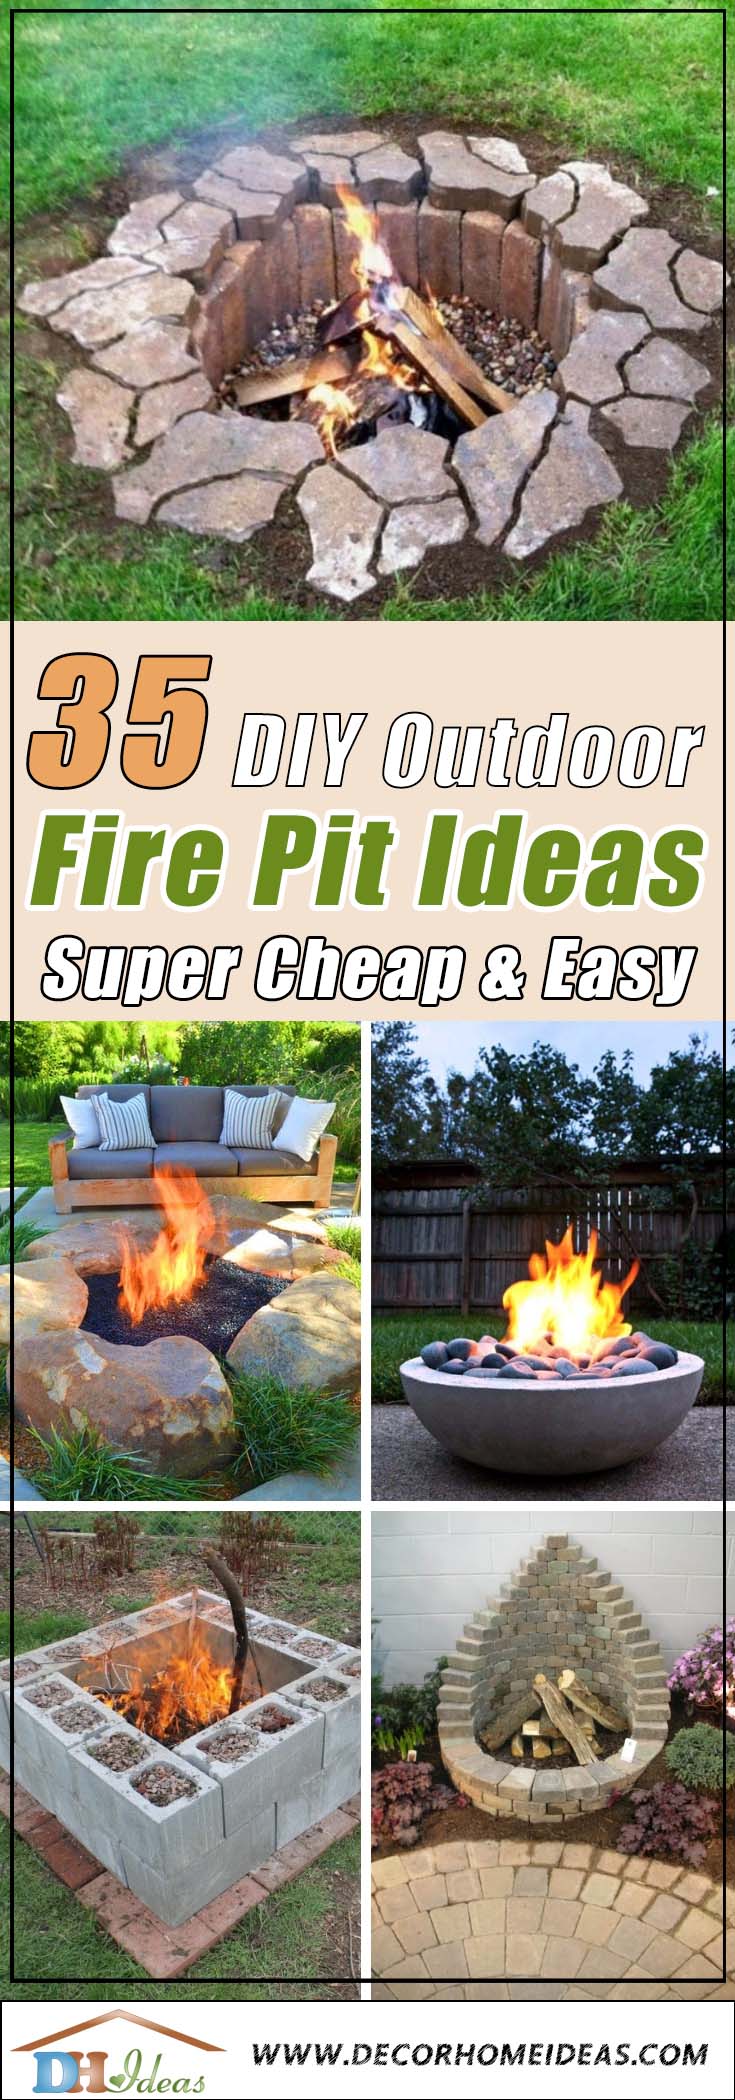 35 Easy To Do Fire Pit Ideas And, Inexpensive Fire Pit